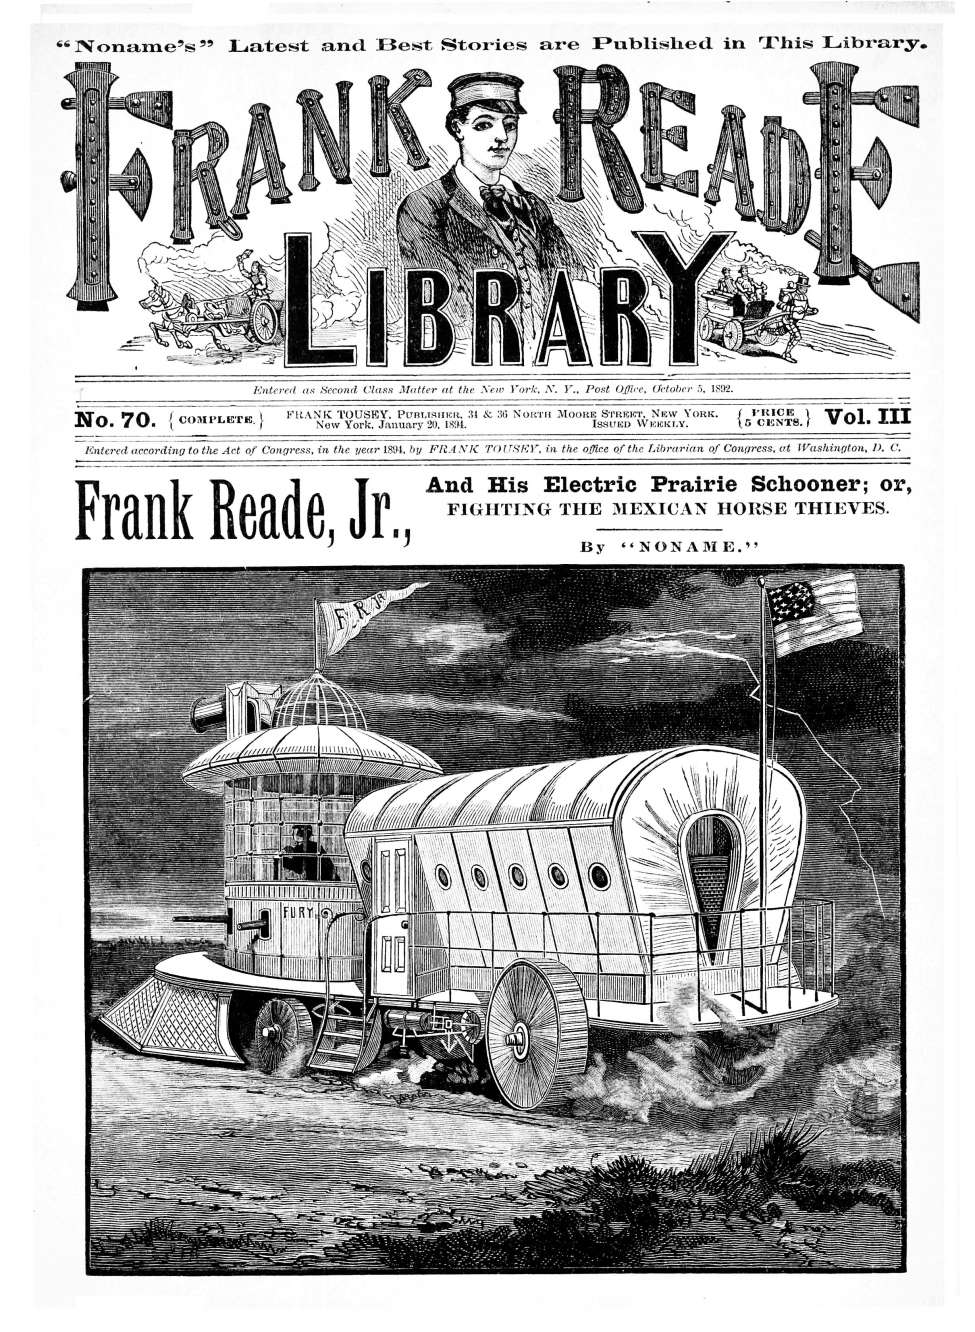 Comic Book Cover For v03 70 - Frank Reade, Jr., and His Electric Prairie Schooner